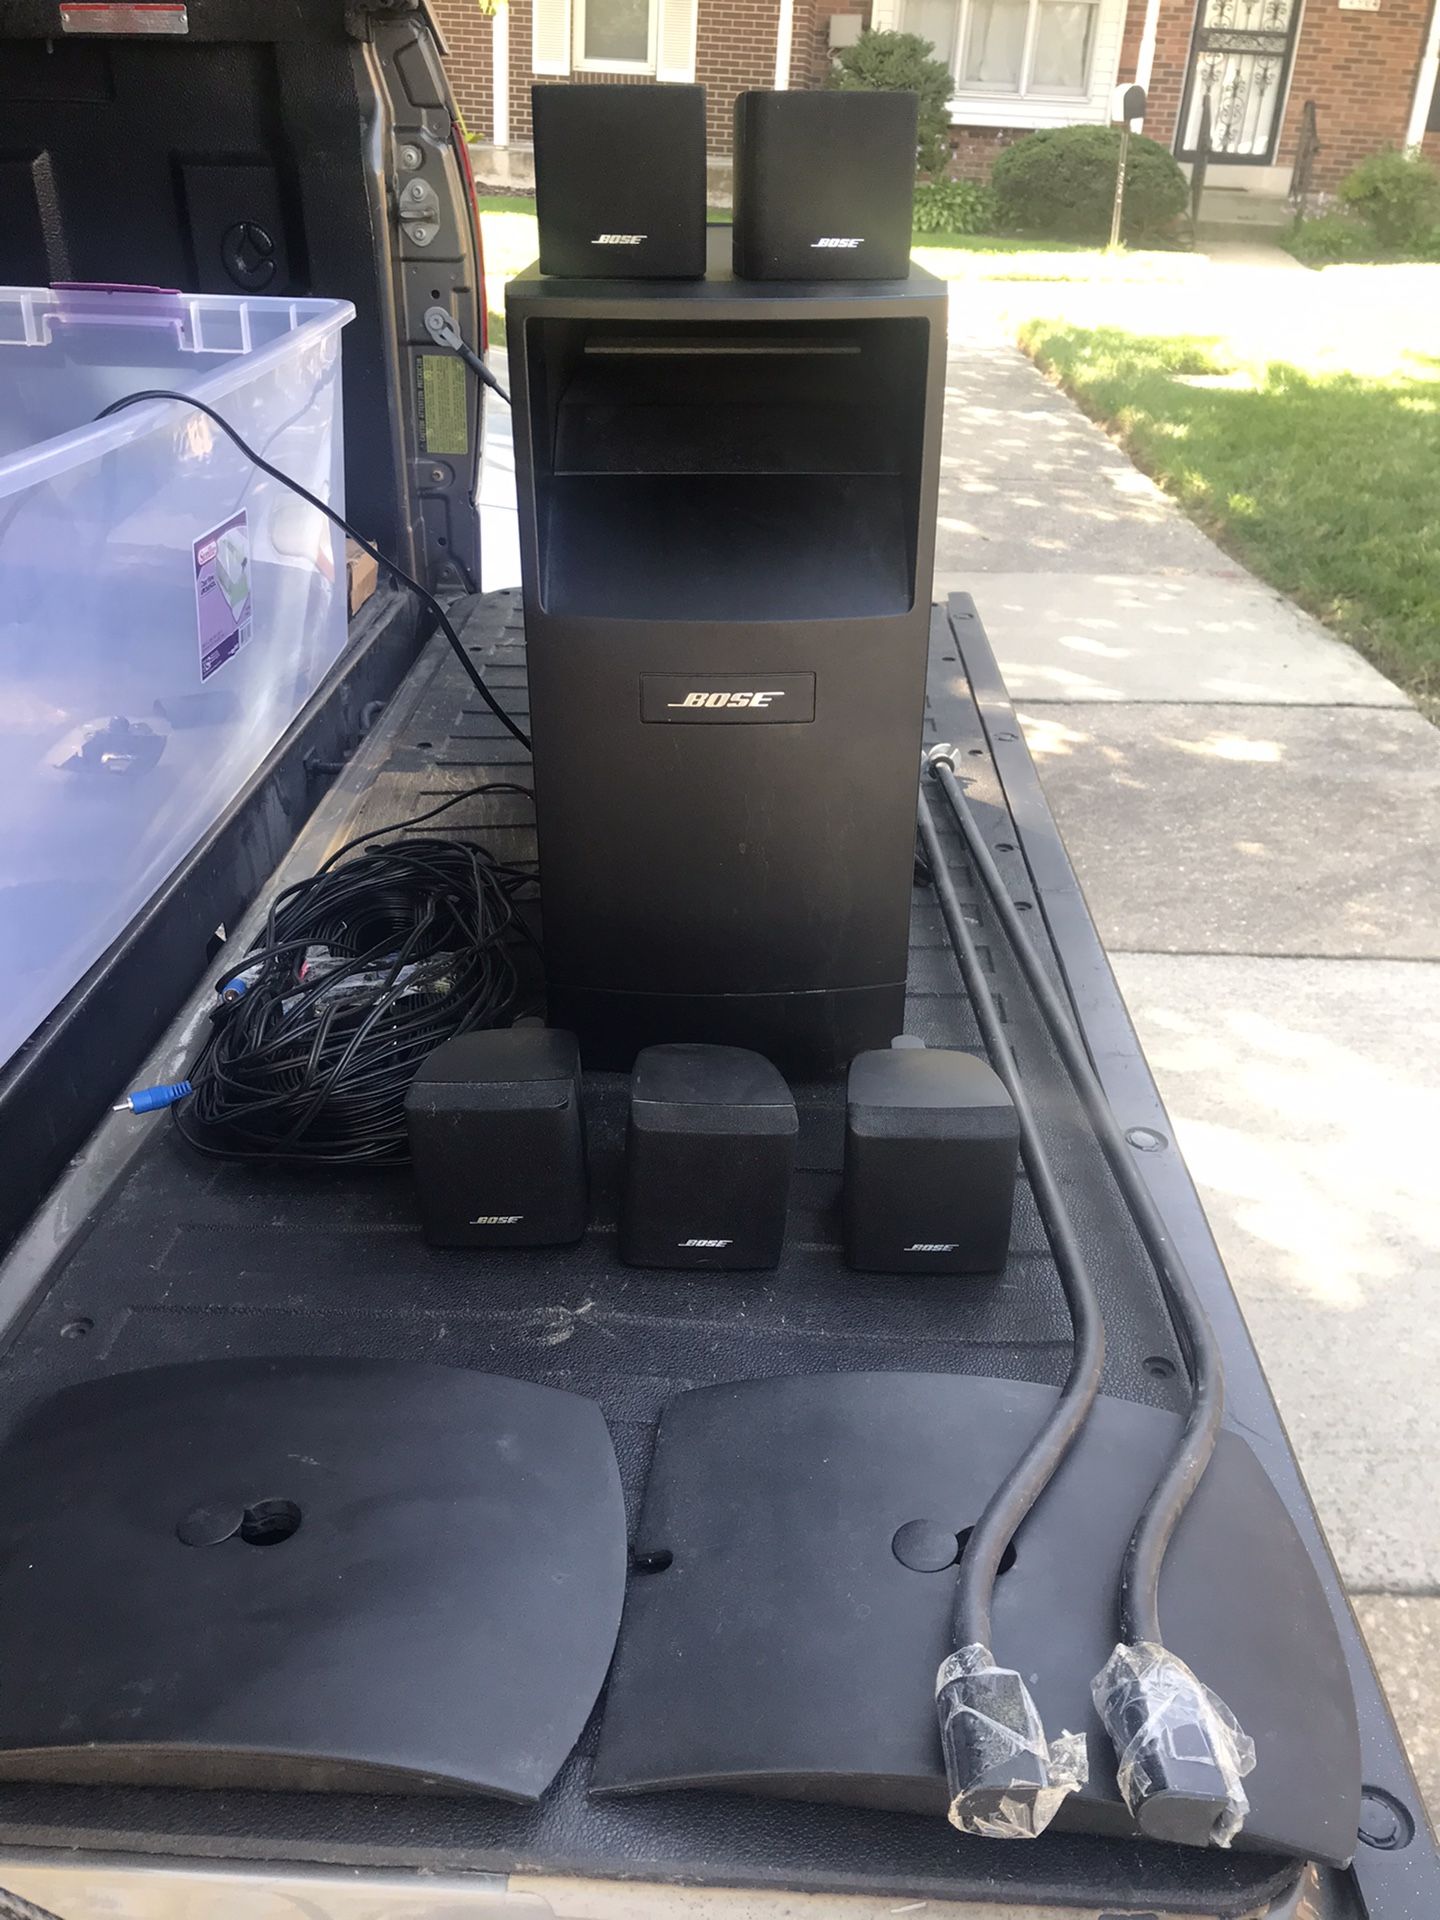 Bose Speakers, wires and speaker stands